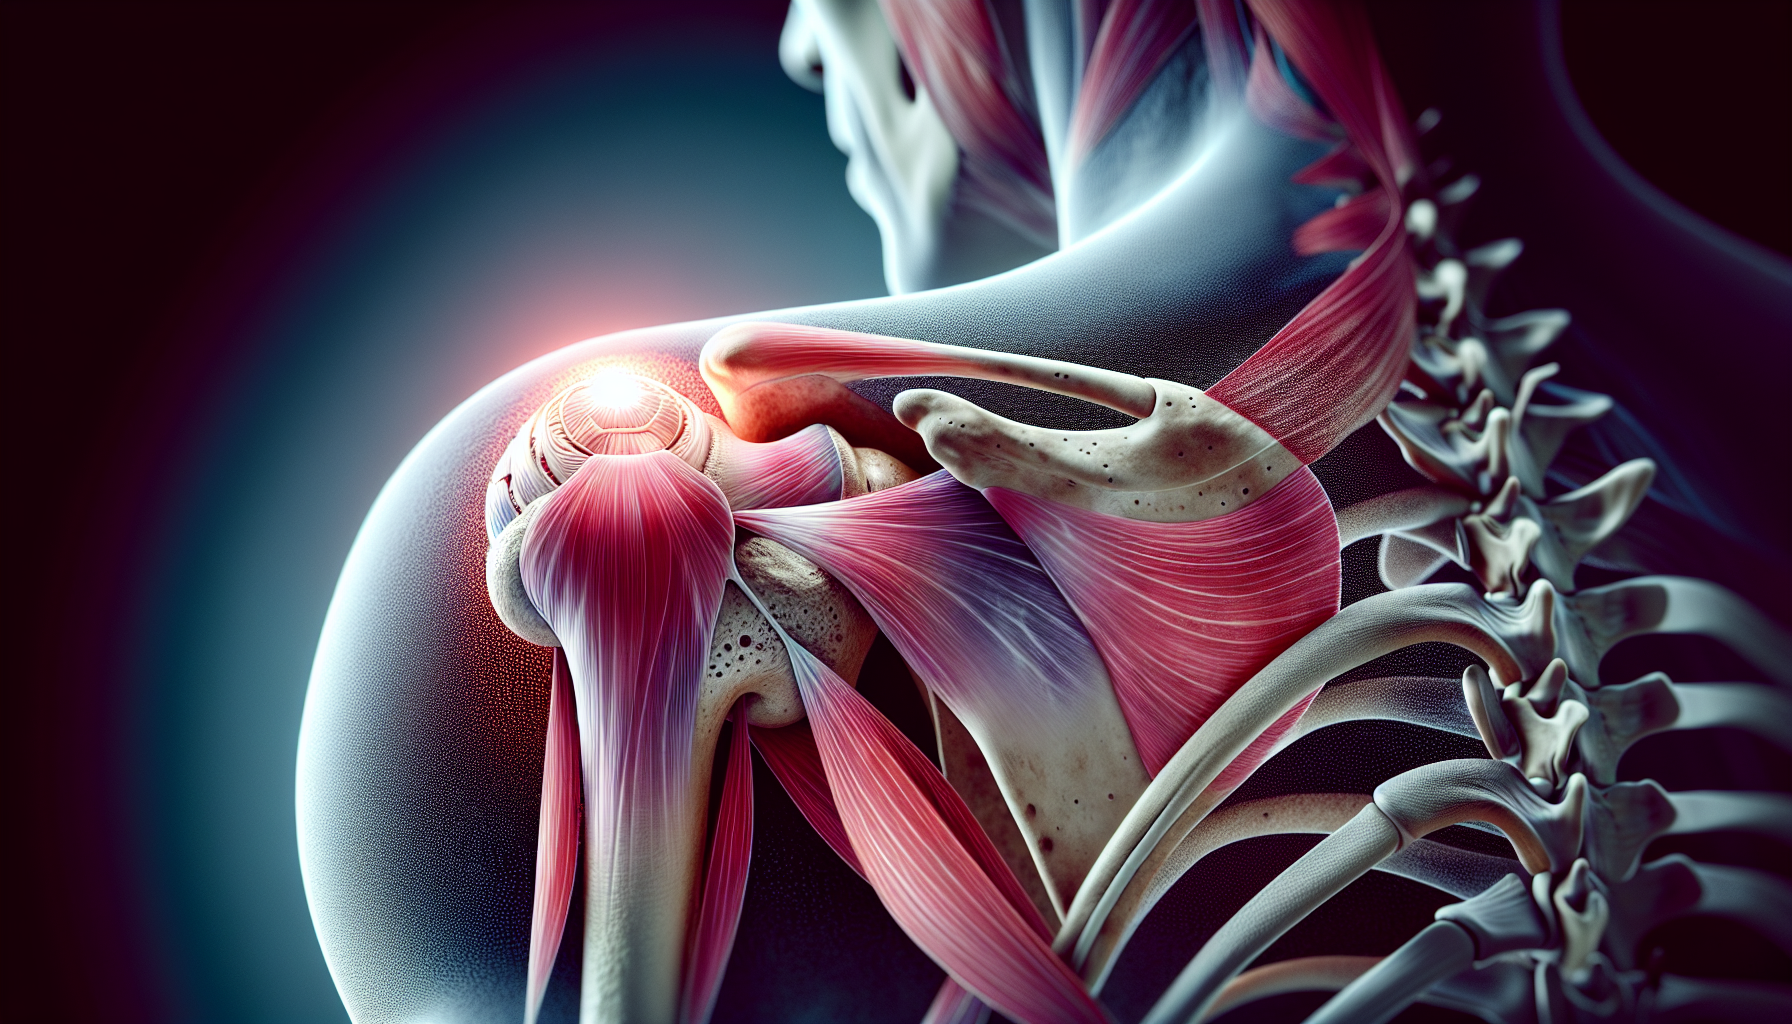 Illustration of a shoulder joint with highlighted areas of pain and injury